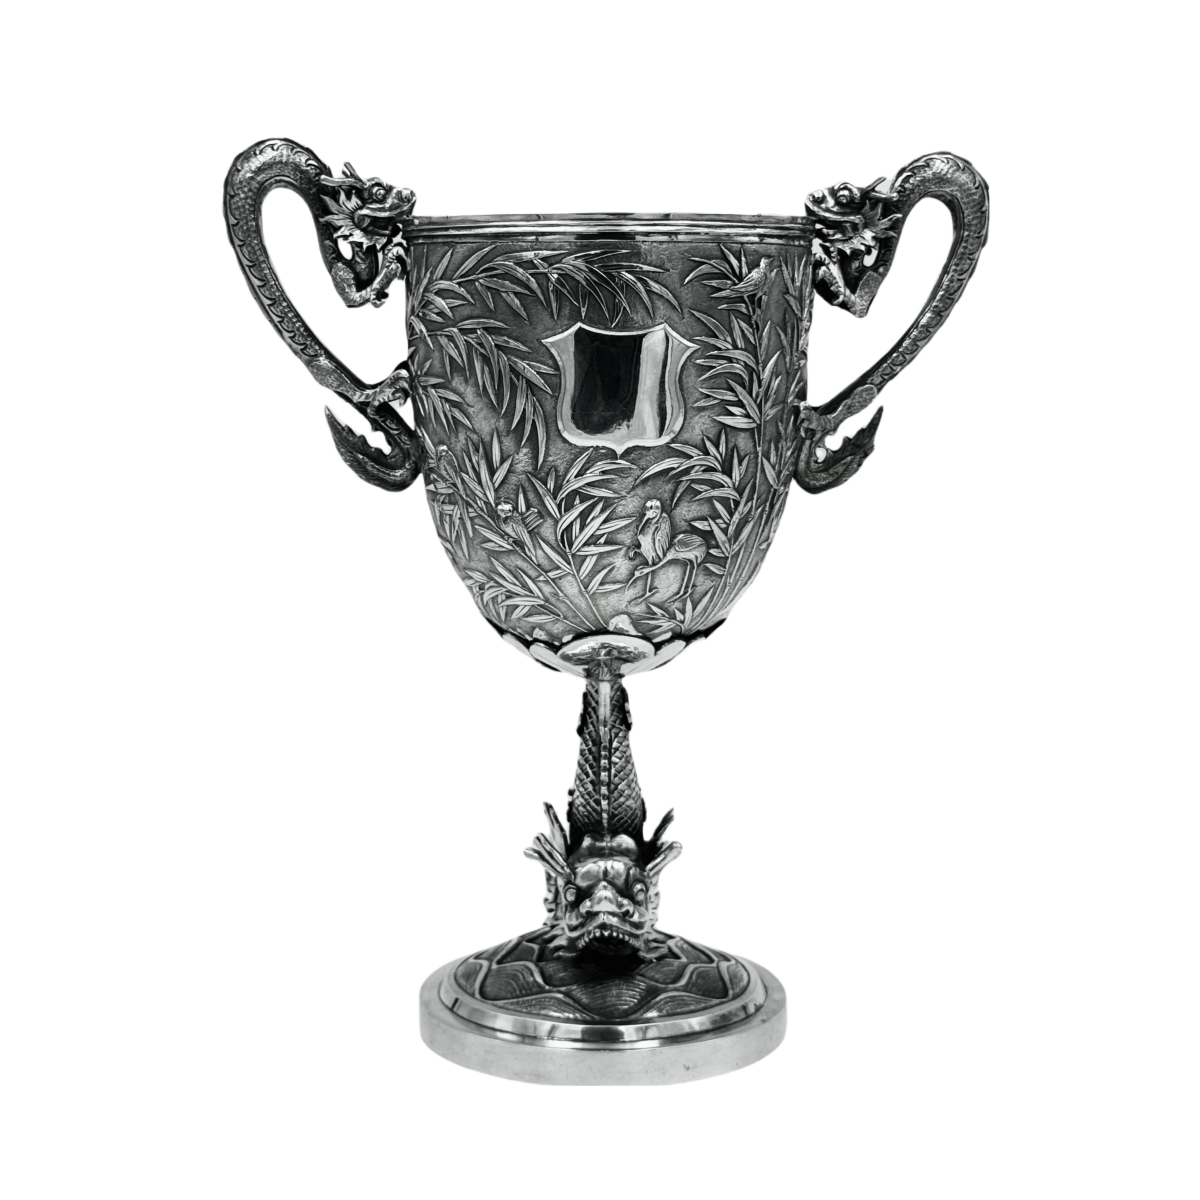 Chinese Export Silver Cup